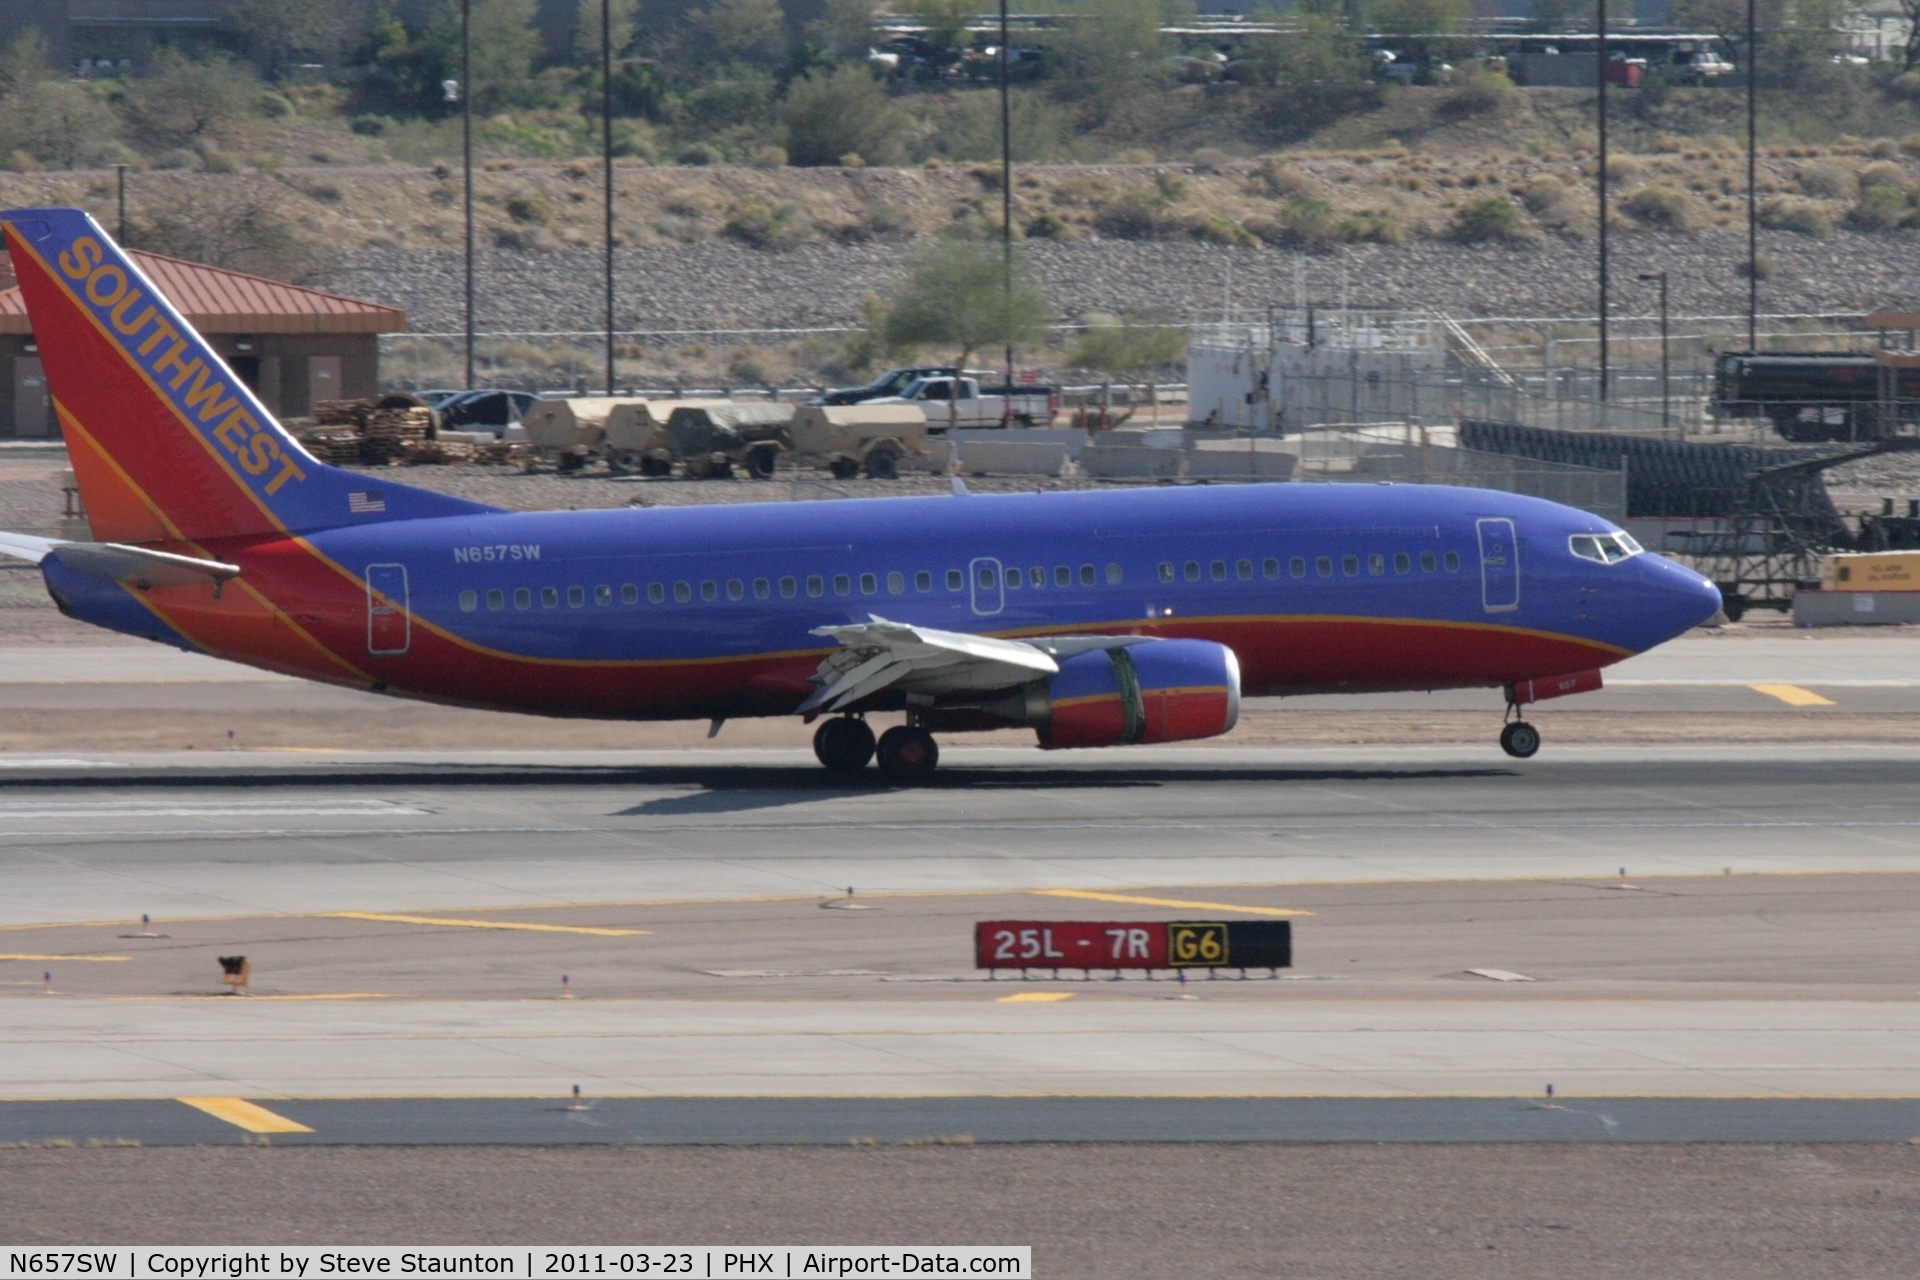 N657SW, 1985 Boeing 737-3L9 C/N 23331, Taken at Phoenix Sky Harbor Airport, in March 2011 whilst on an Aeroprint Aviation tour